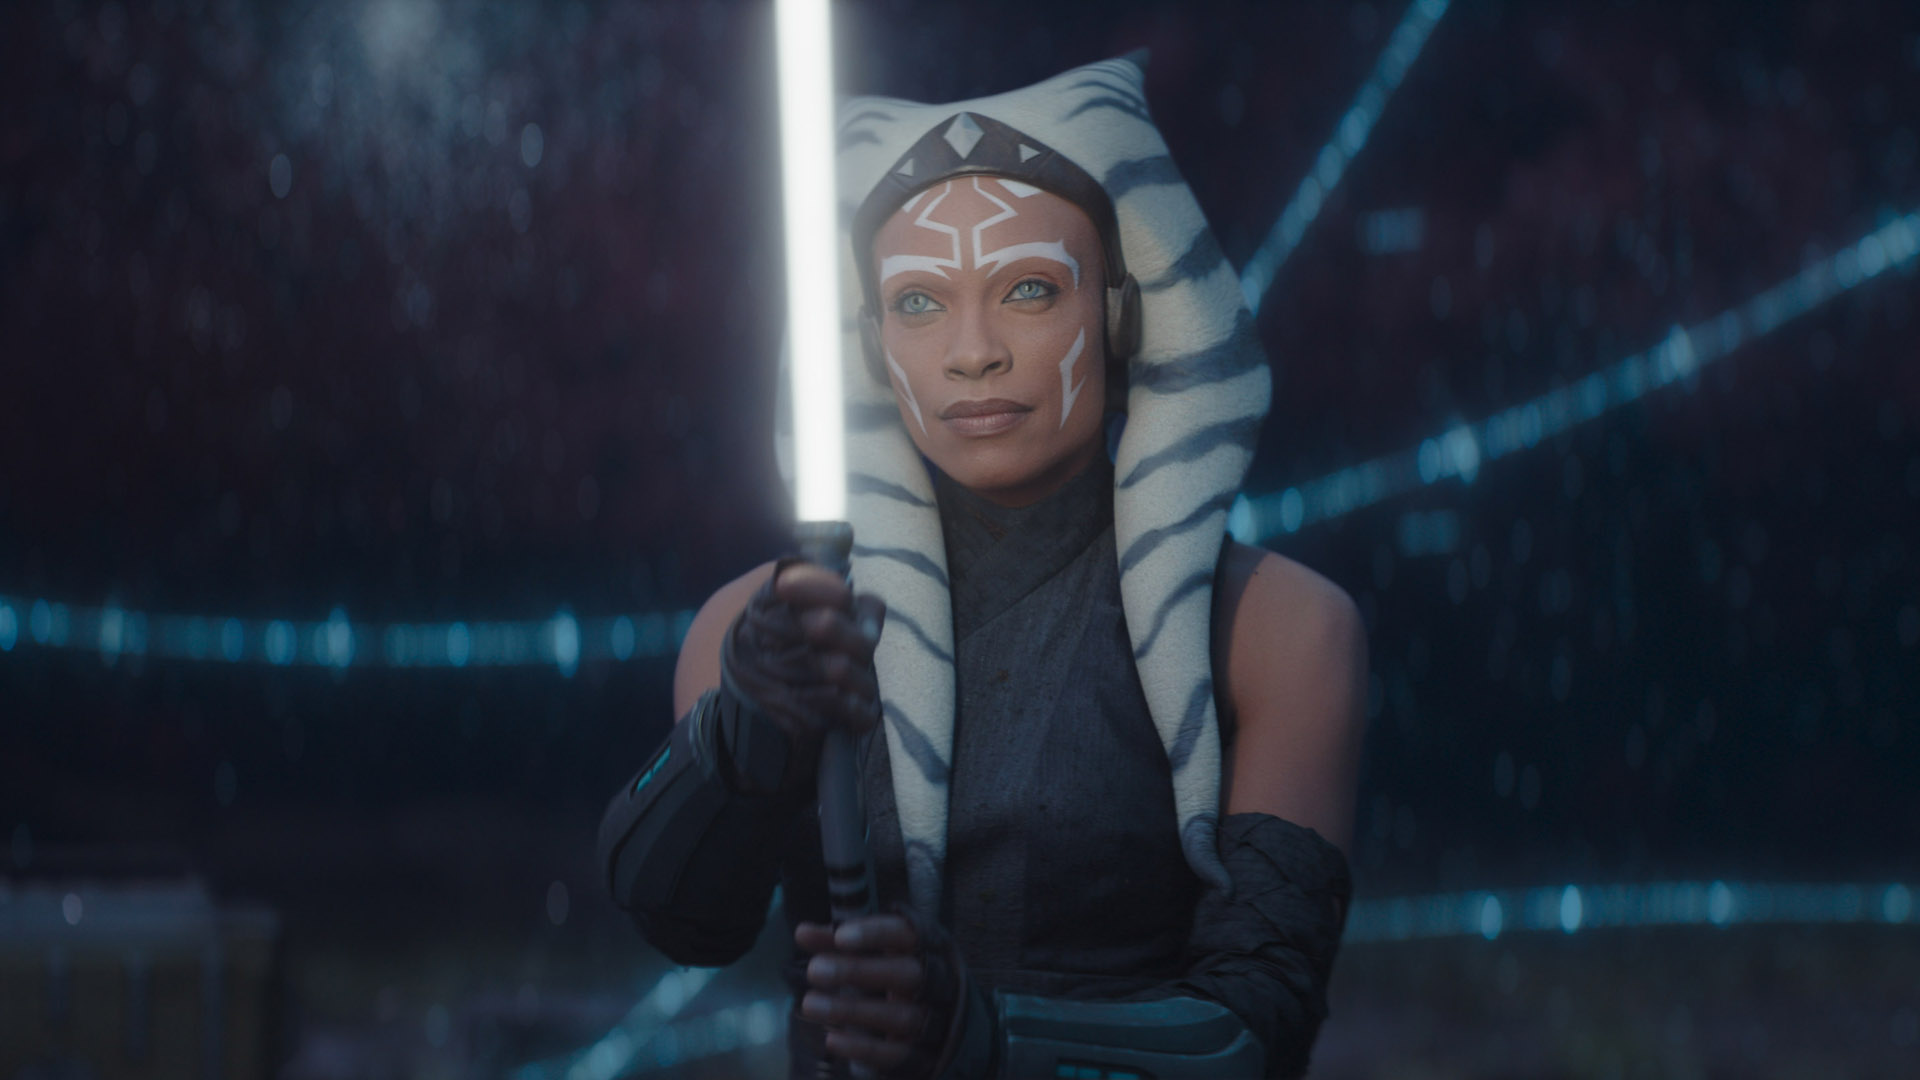 Ahsoka Tano holds up one of her lightsabers in her standalone Star Wars TV show on Disney Plus